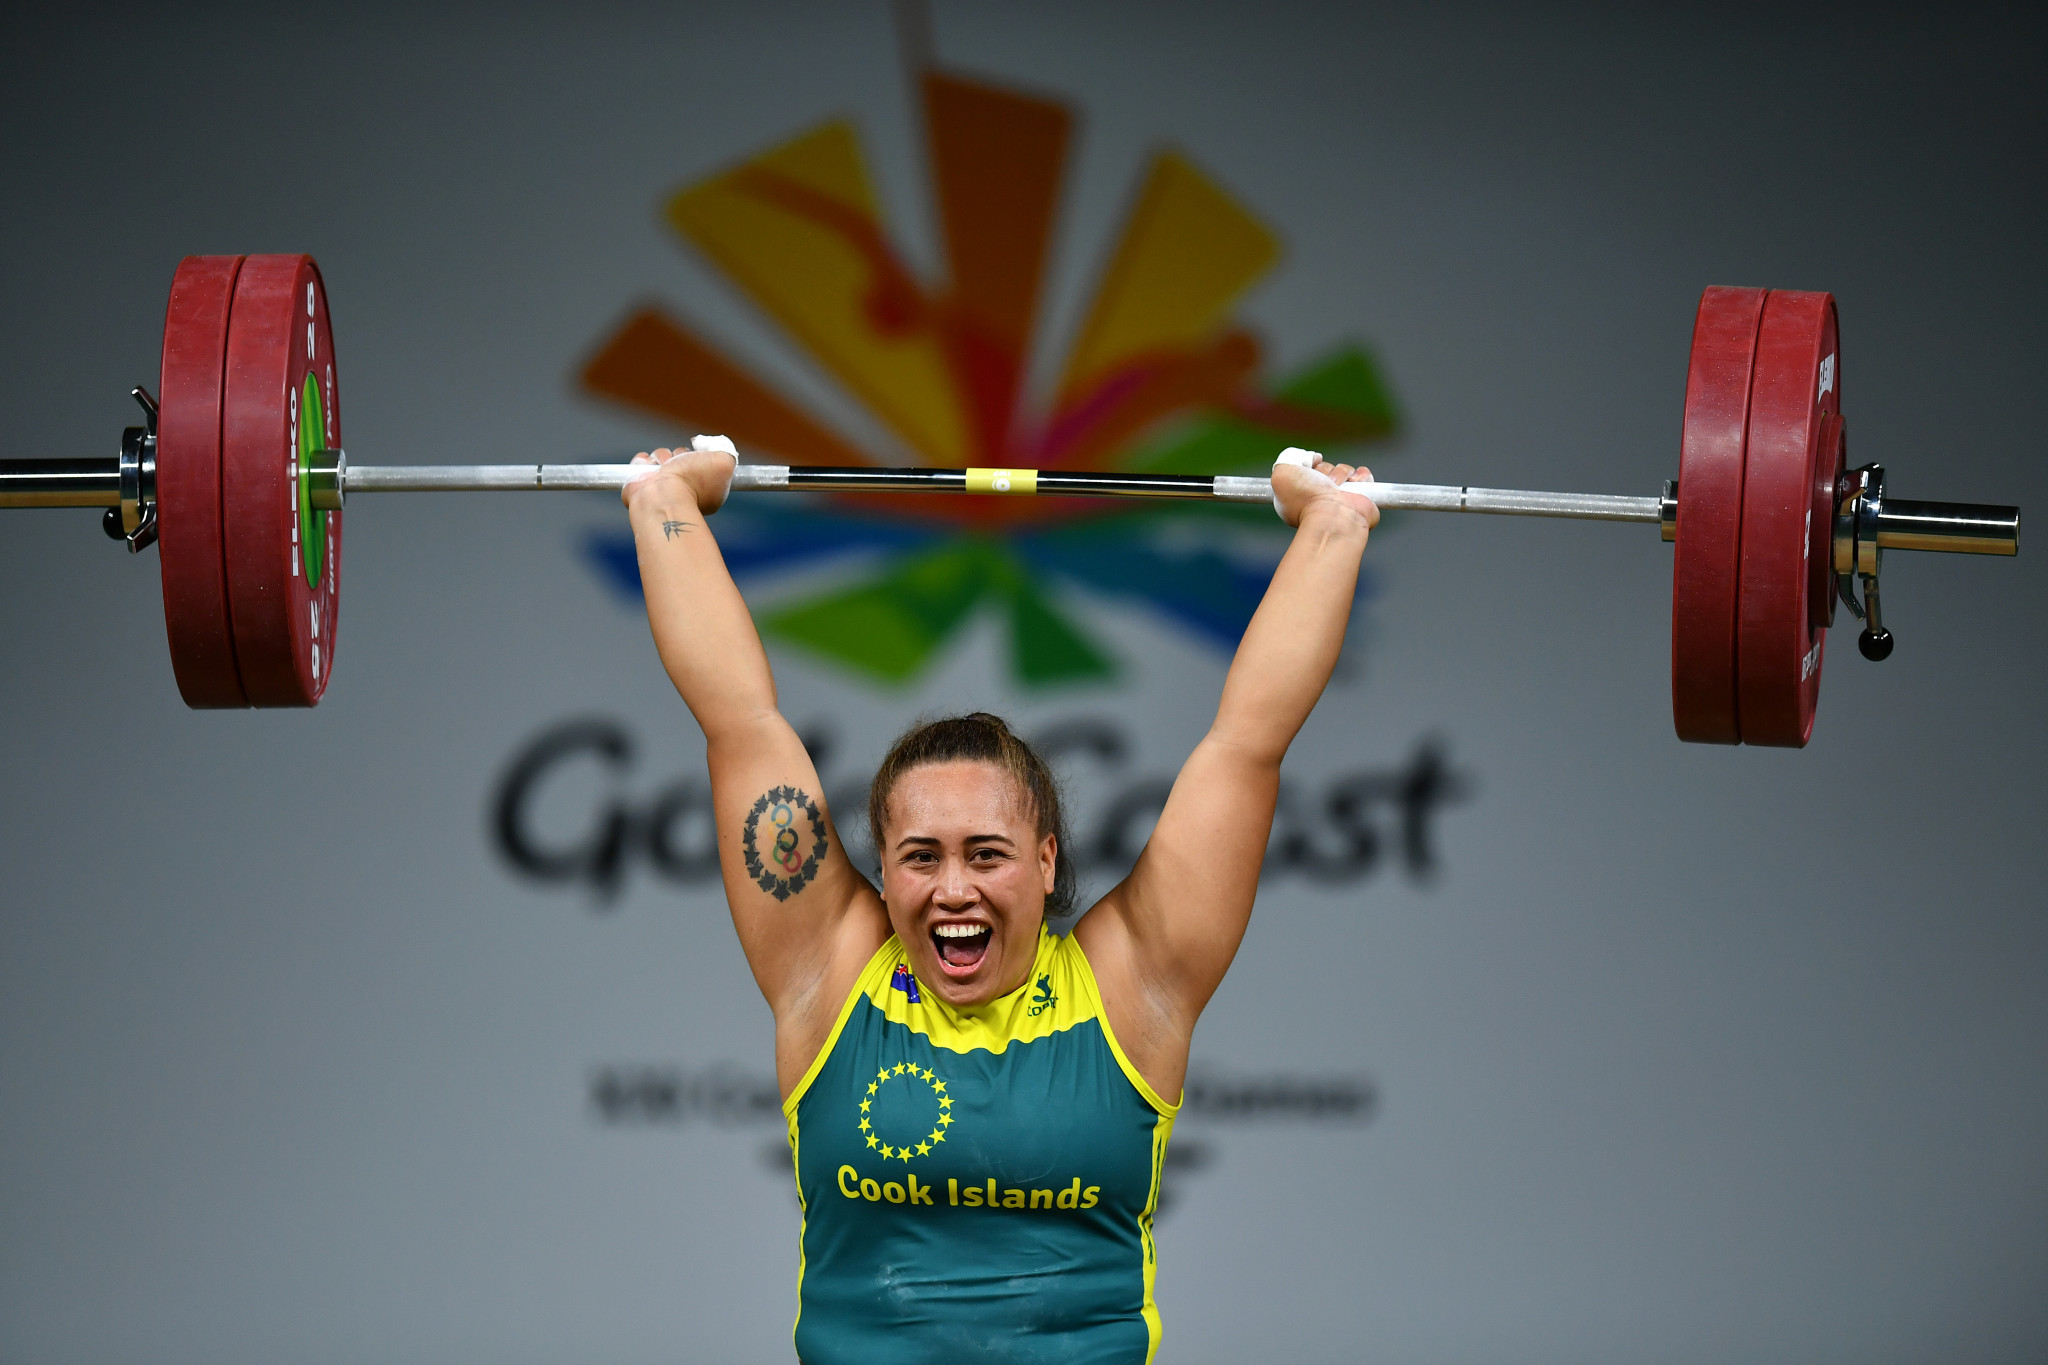 Luisa Peters, who retired from competition after the 2018 Commonwealth Games and is now a serving police officer in the Cook Islands, will join the IWF Executive Board ©Getty Images